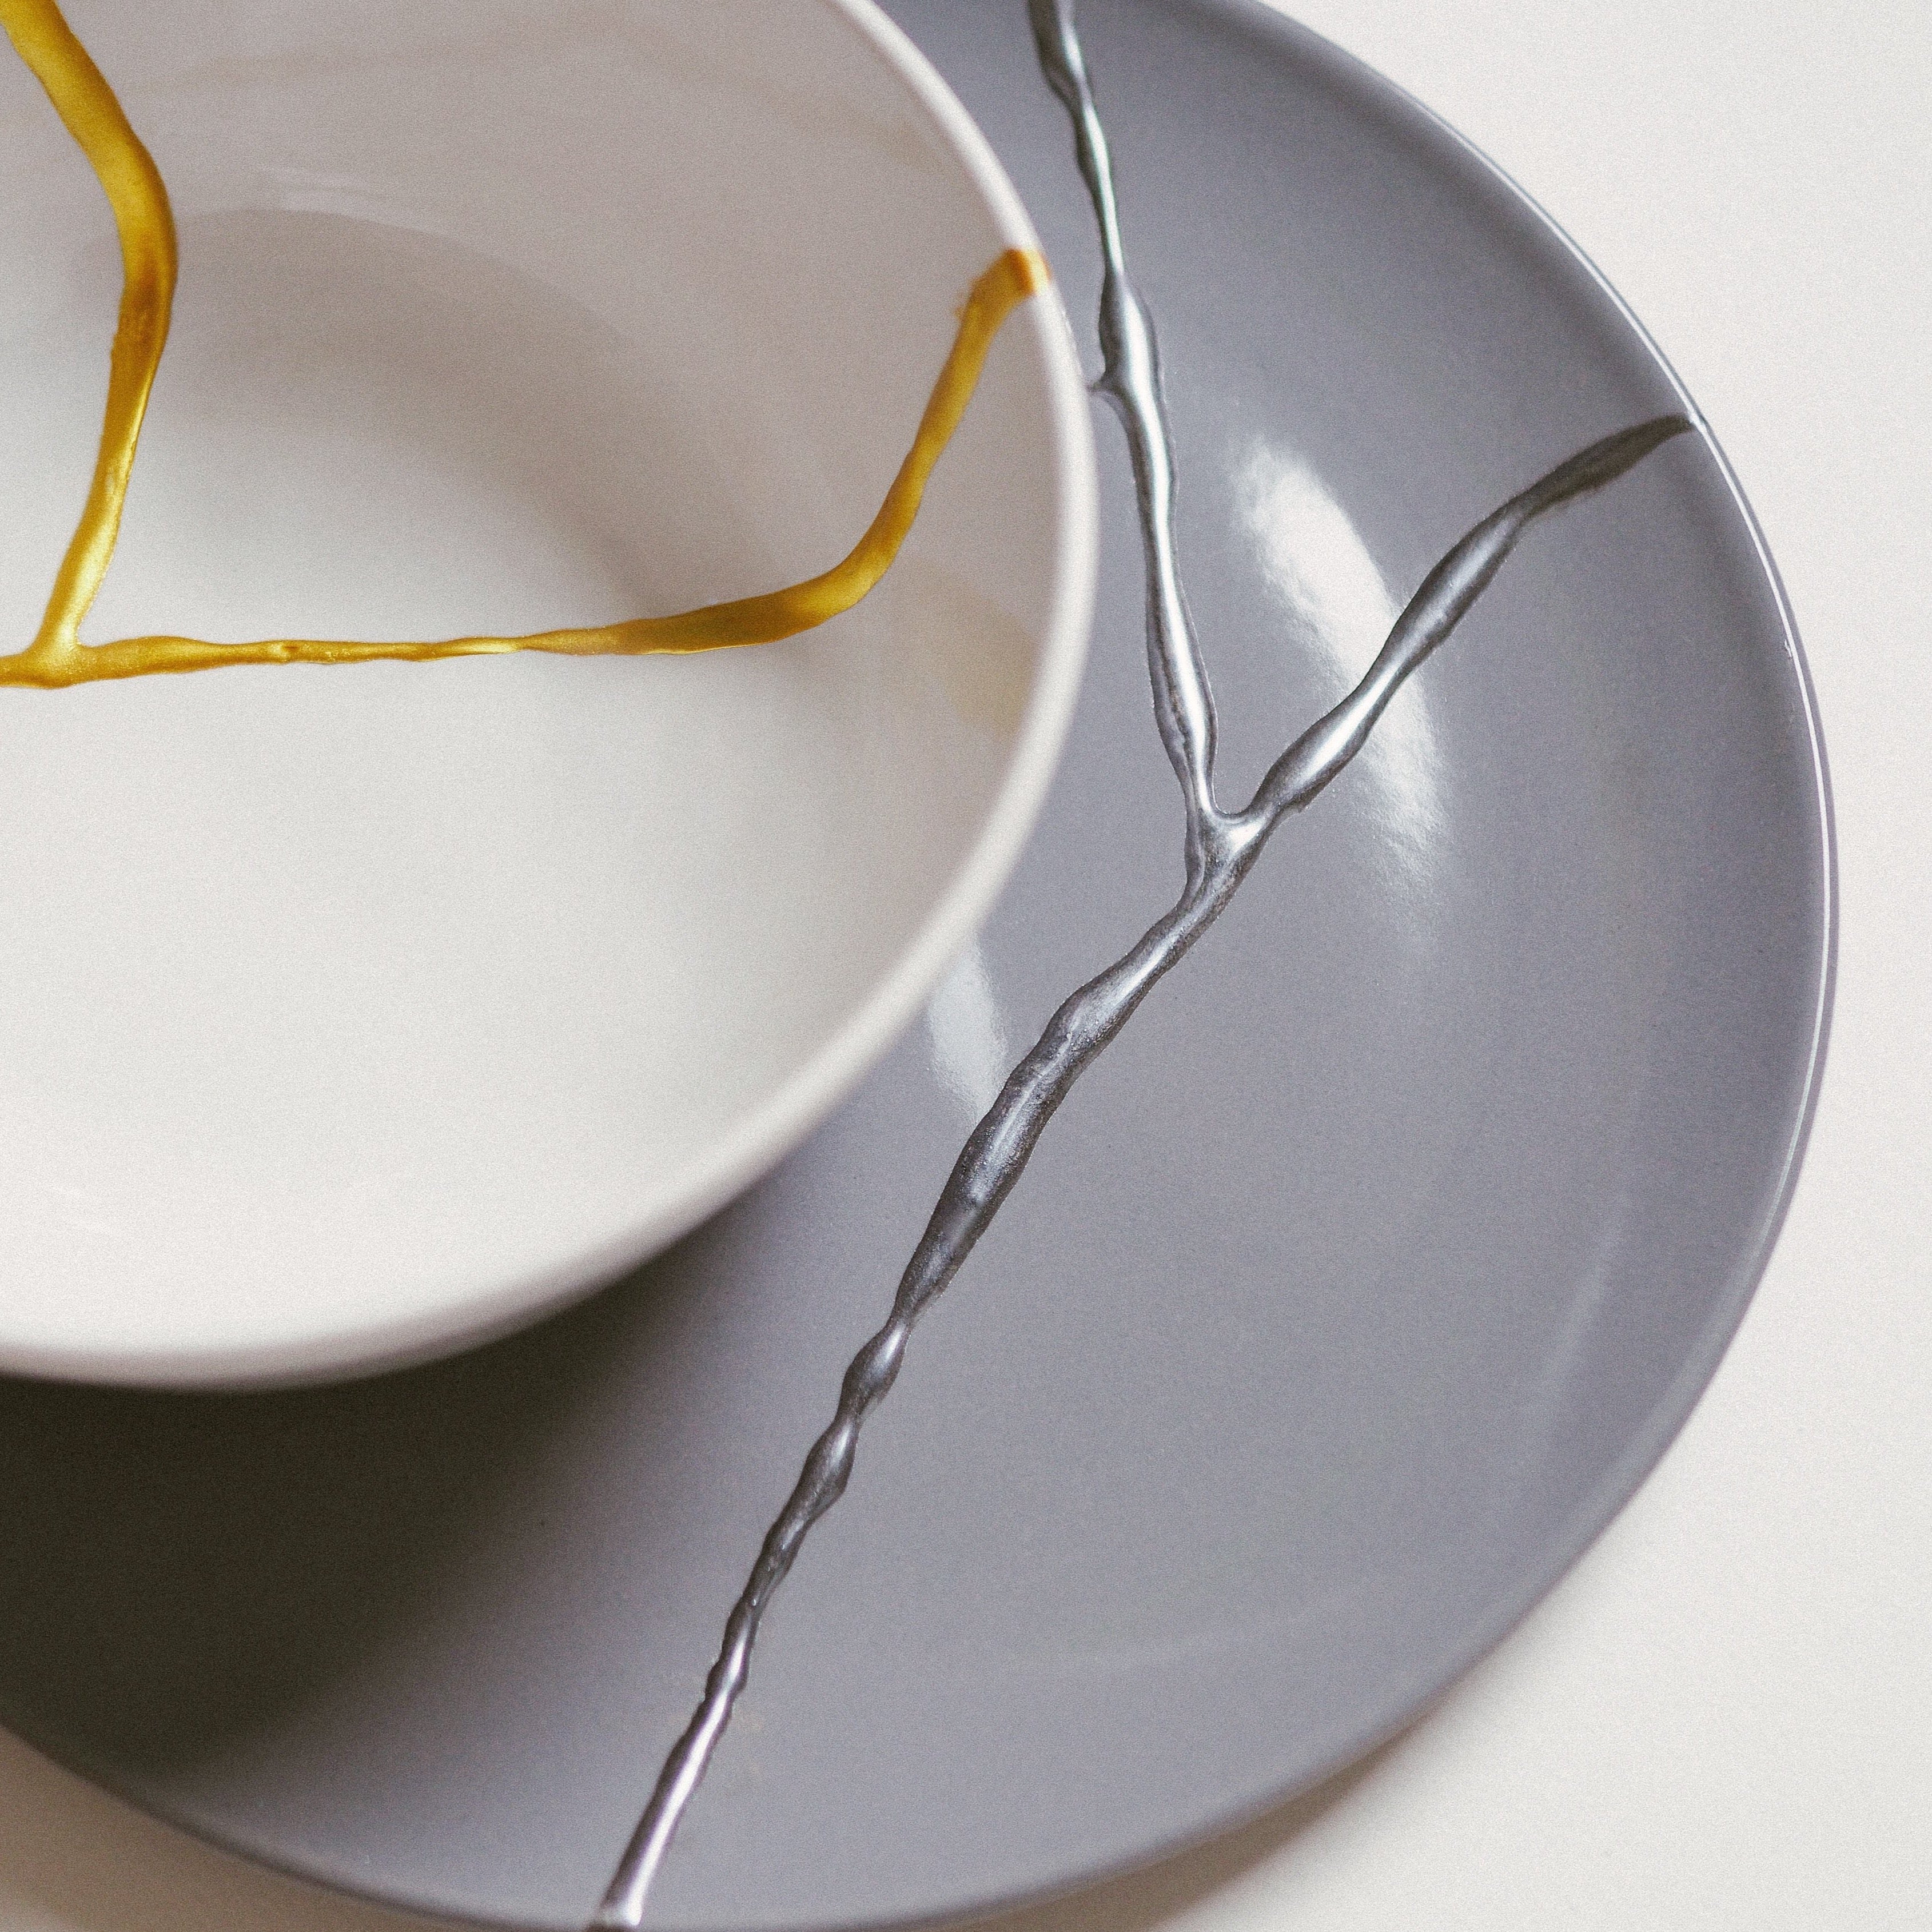 Sway Gallery London on X: ITEM: KINTSUGI REPAIR KIT (GOLD) PRICE: £25 Turn  your own broken ceramics into a piece of art! 😍 'New Kintsugi' is a new  way of gluing porcelain